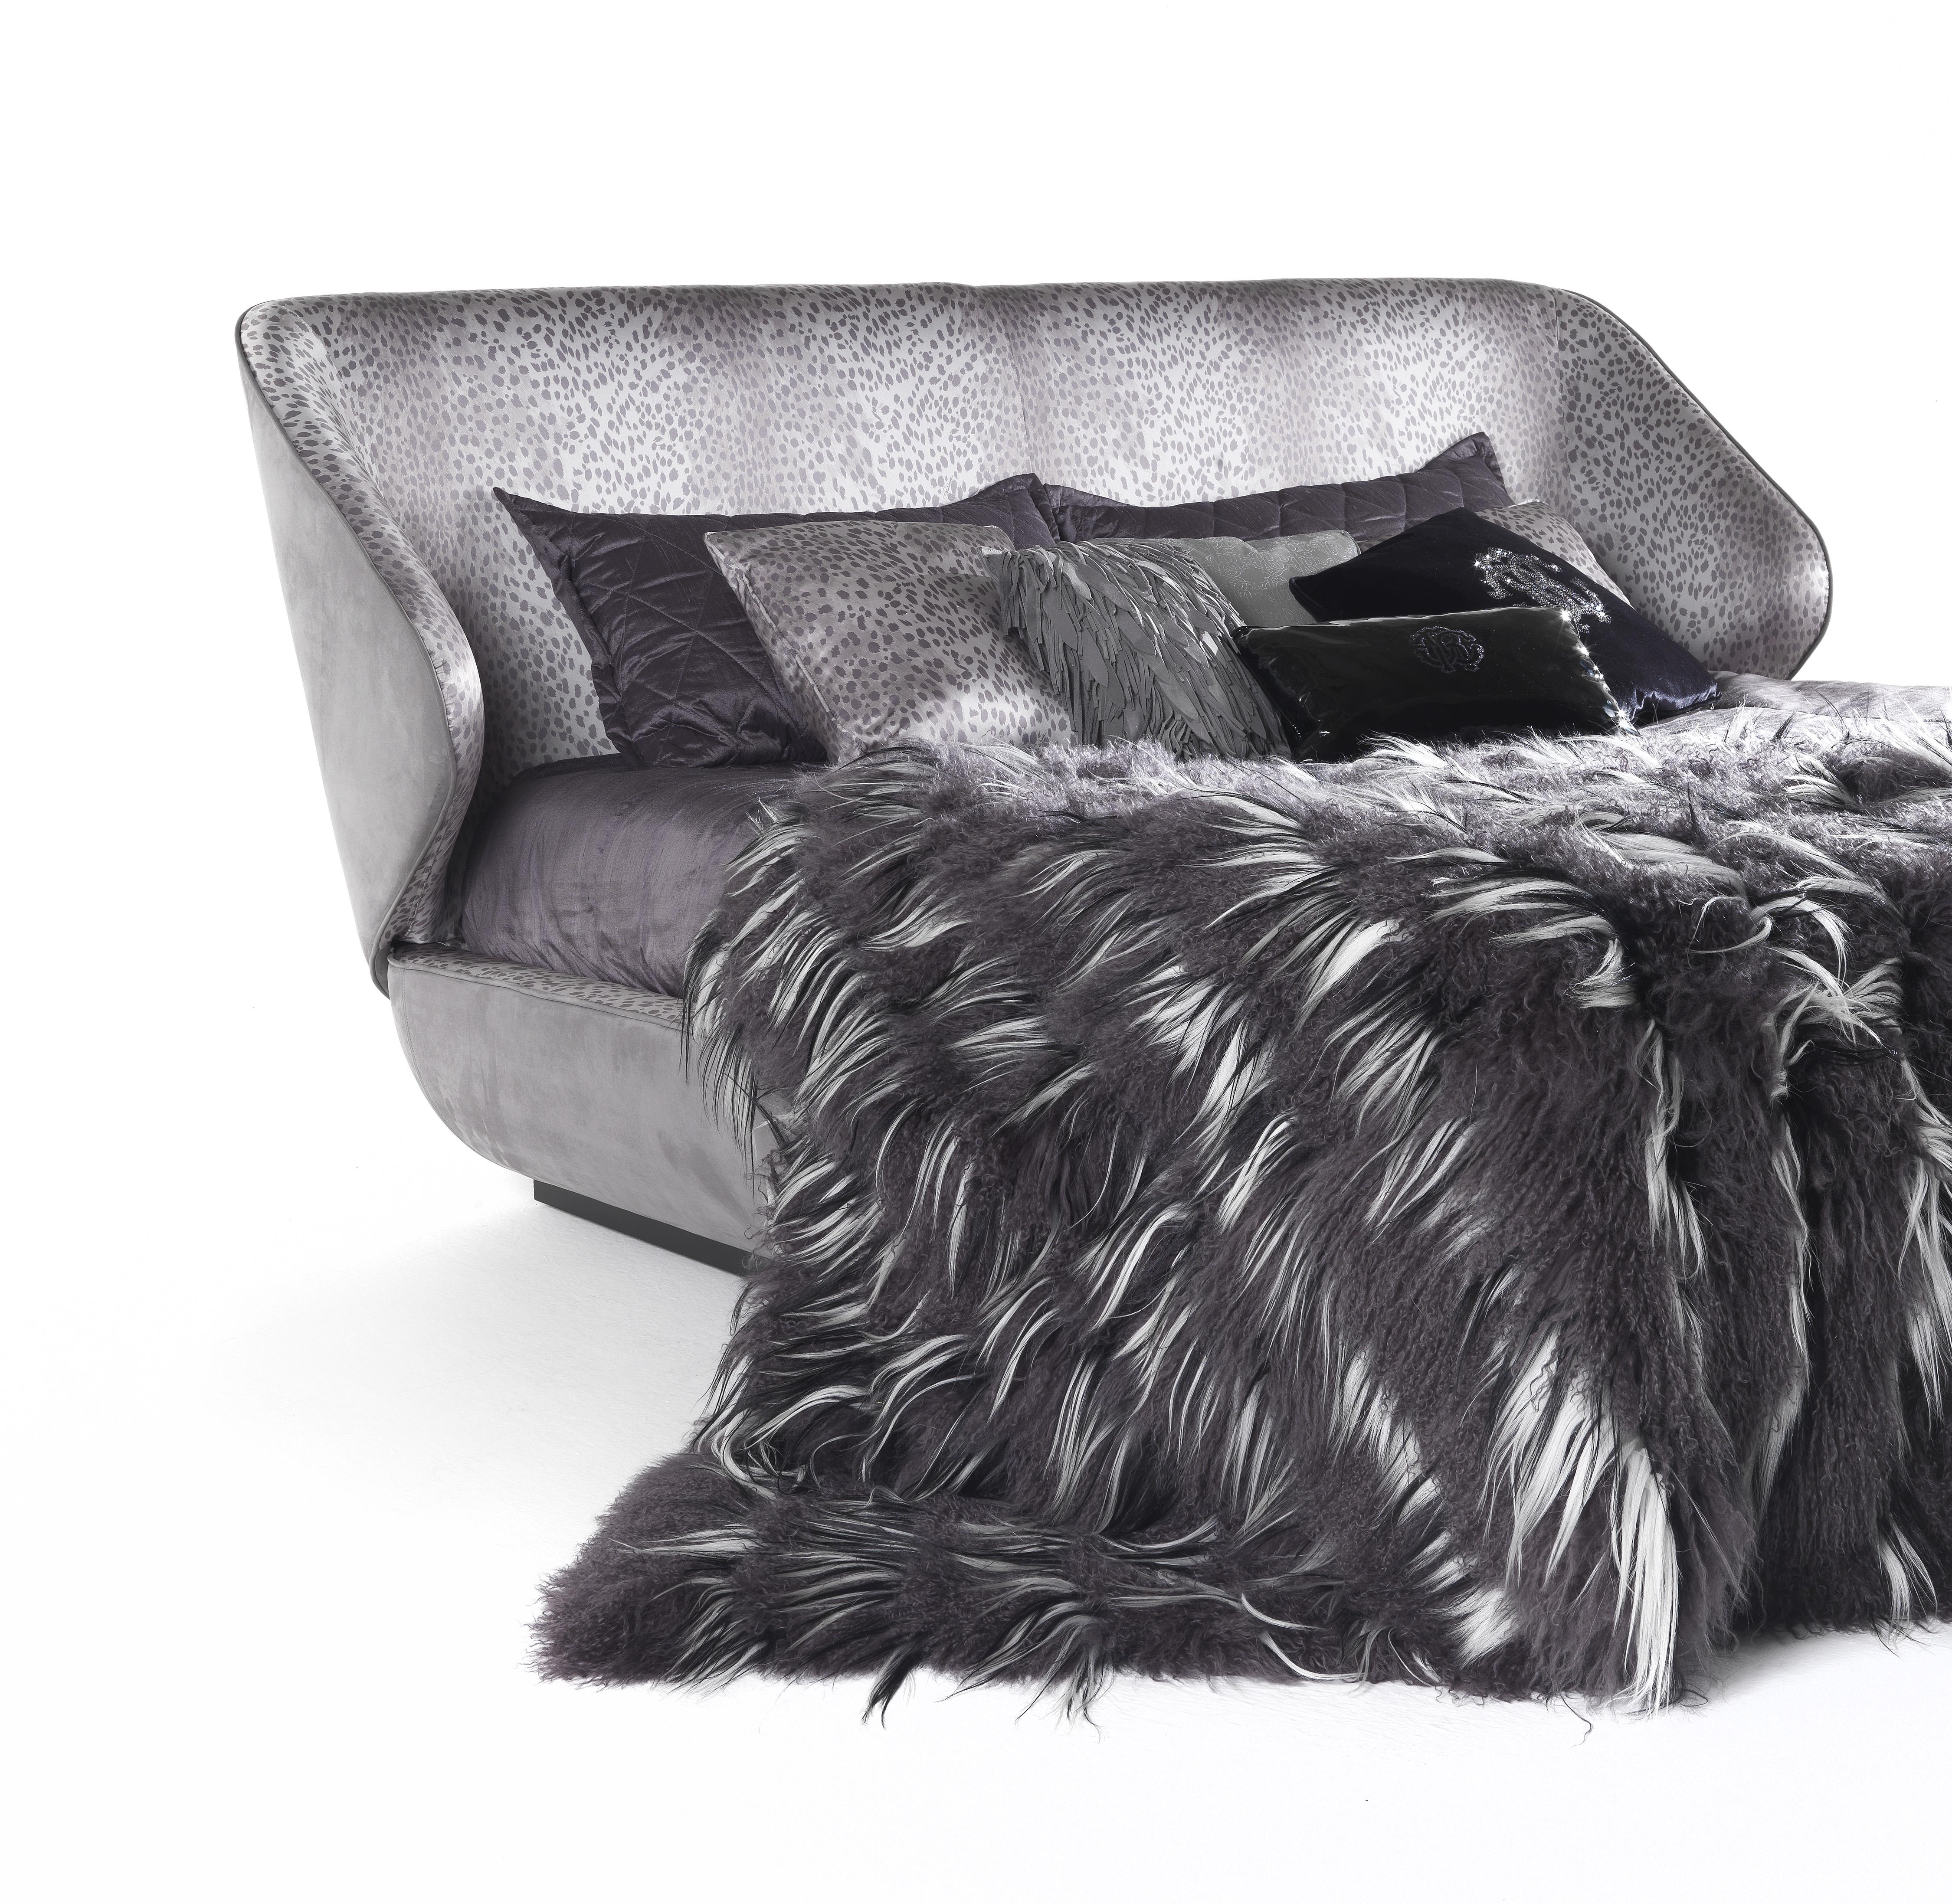 Modern 21st Century Key West Bed in Fabric by Roberto Cavalli Home Interiors For Sale